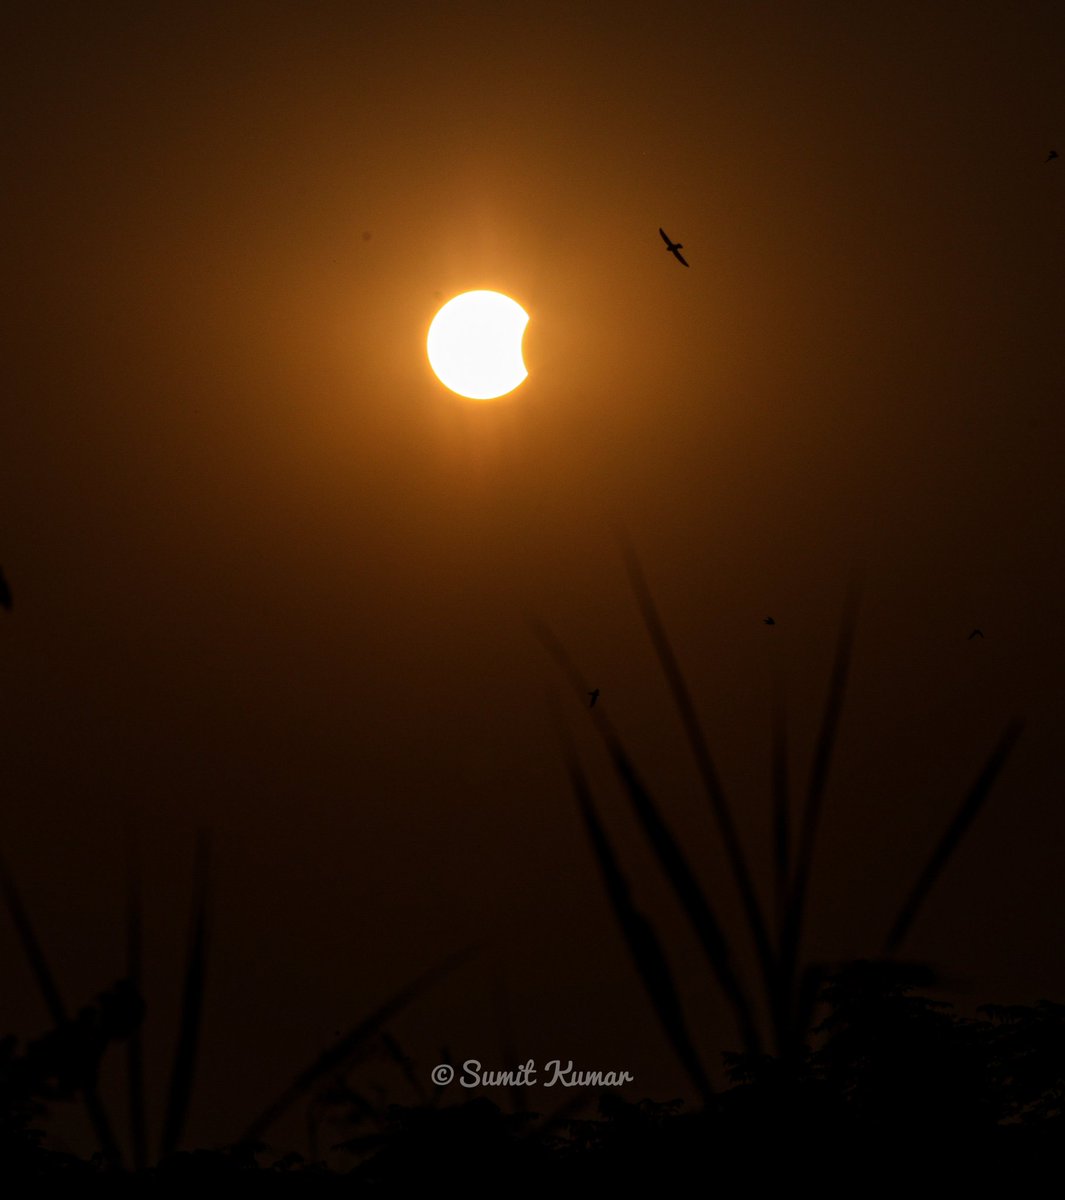 Photos of the last solar eclipse of the year from Lucknow .

#solar #solareclipse #solareclipse2022 #sunset #nature #naturegeography #naturelovers #canonmark5div #canonlife #canonindiaofficial #canonindia_official #sun #Lucknow #lucknowdiaries #eclipse #eclipsesolar #UNIVERSE